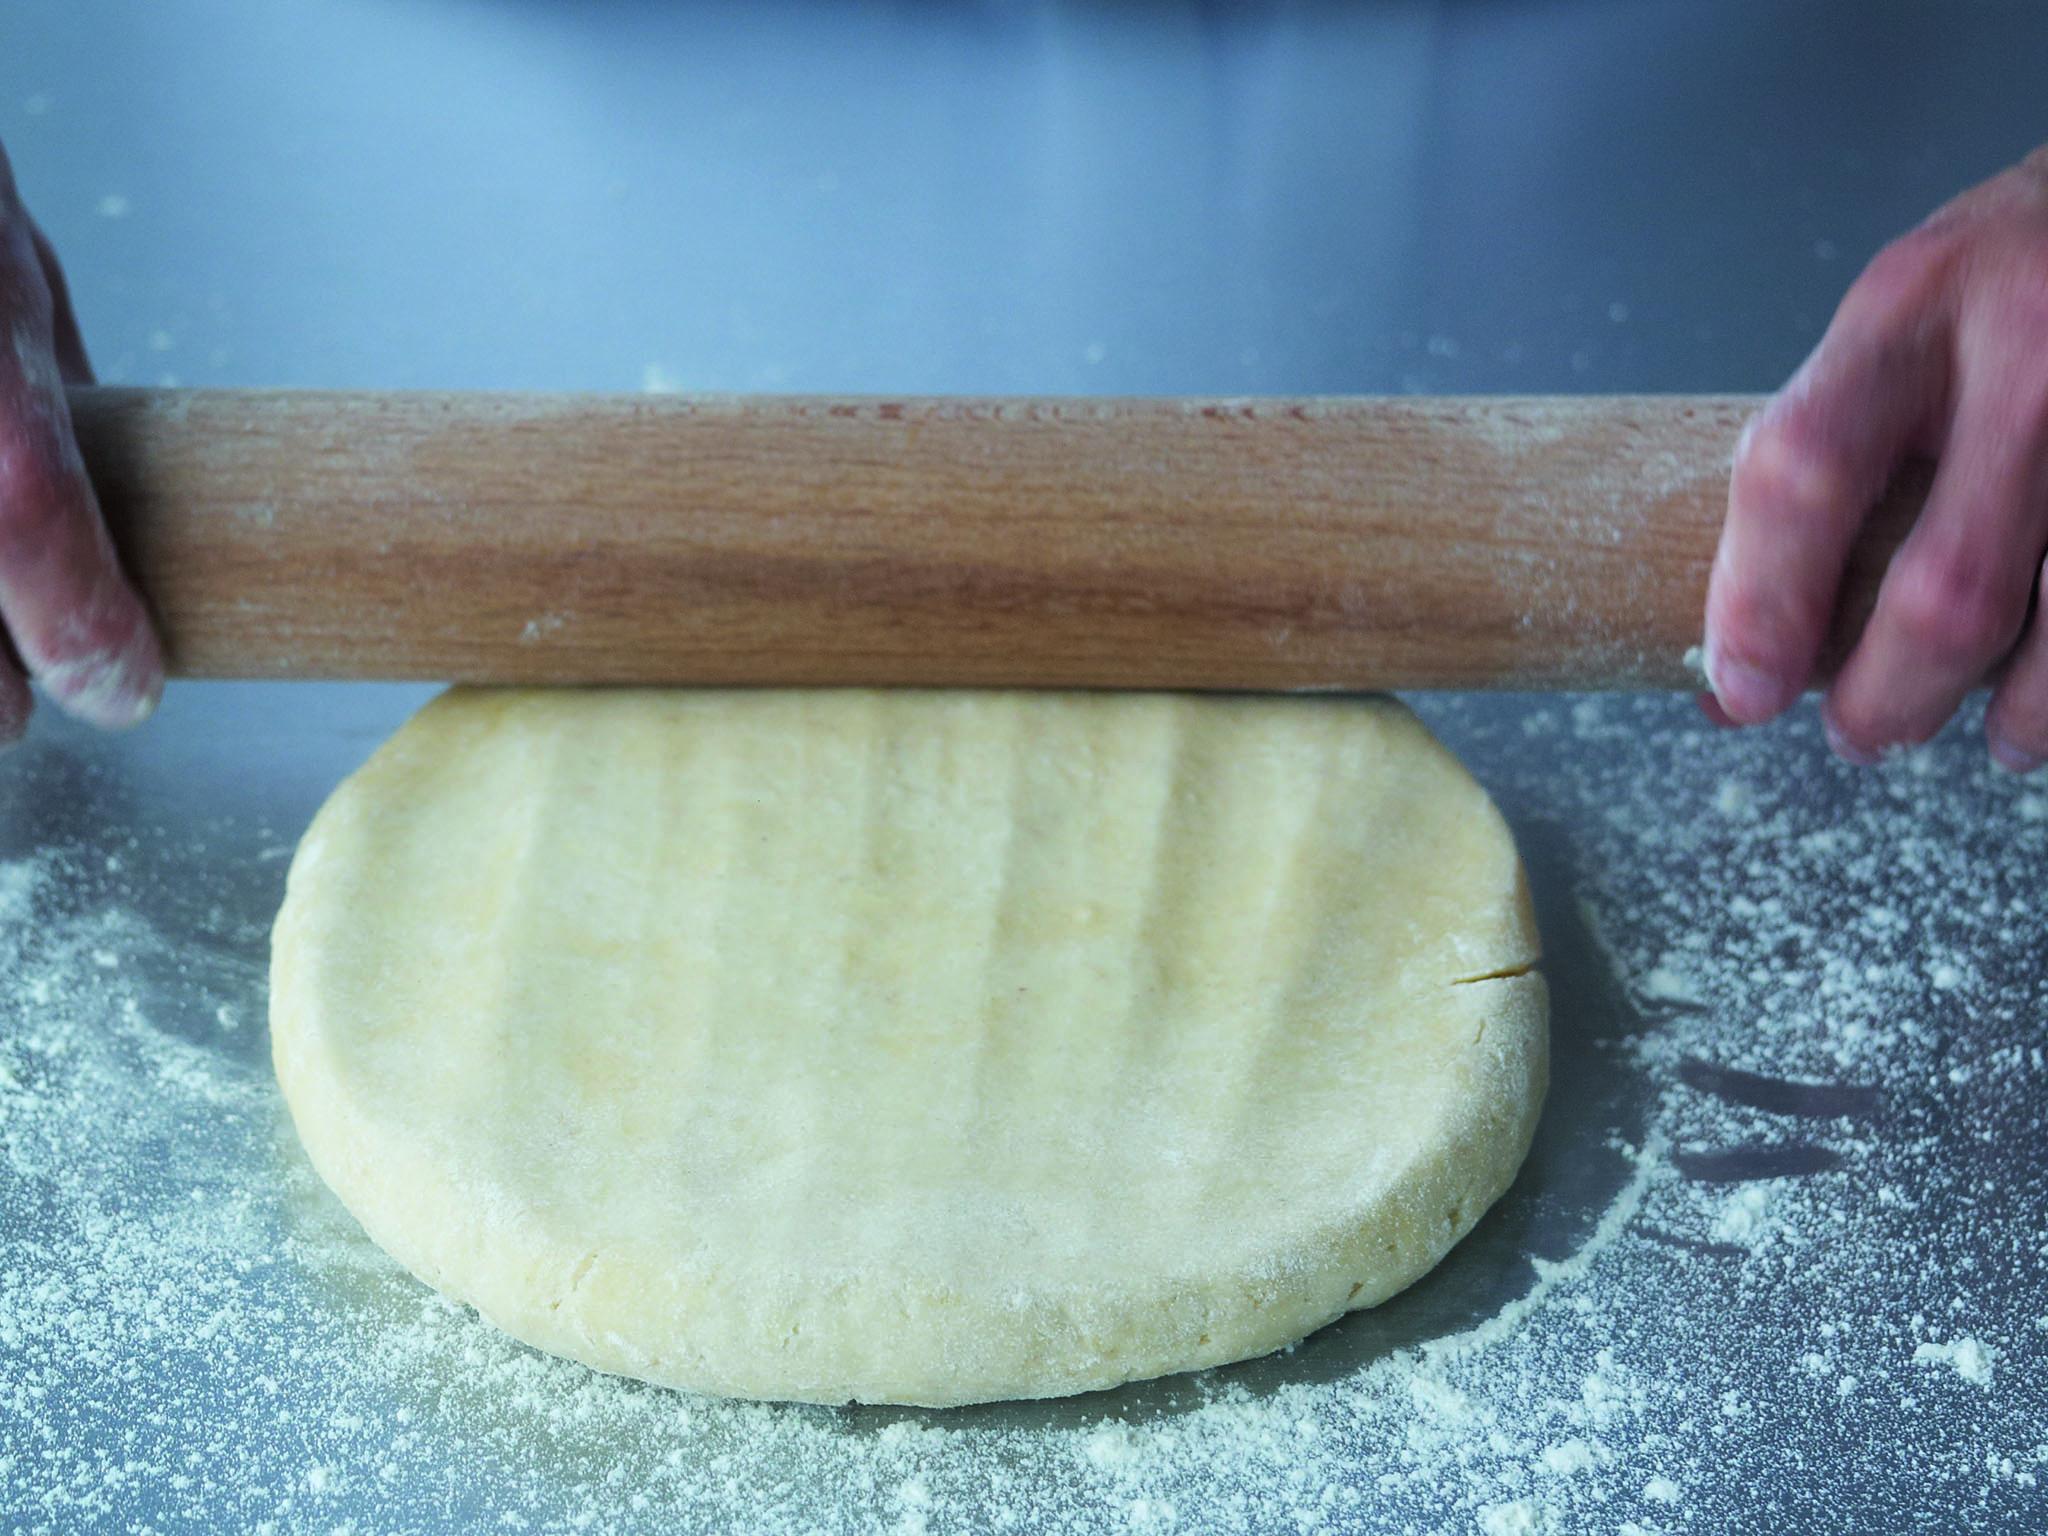 2. Once the circle has at least doubled in size, start to roll it. Use 3 short, sharp strokes of the rolling pin, rather than one long roll. Turn the pastry 90 degrees after every few rolls